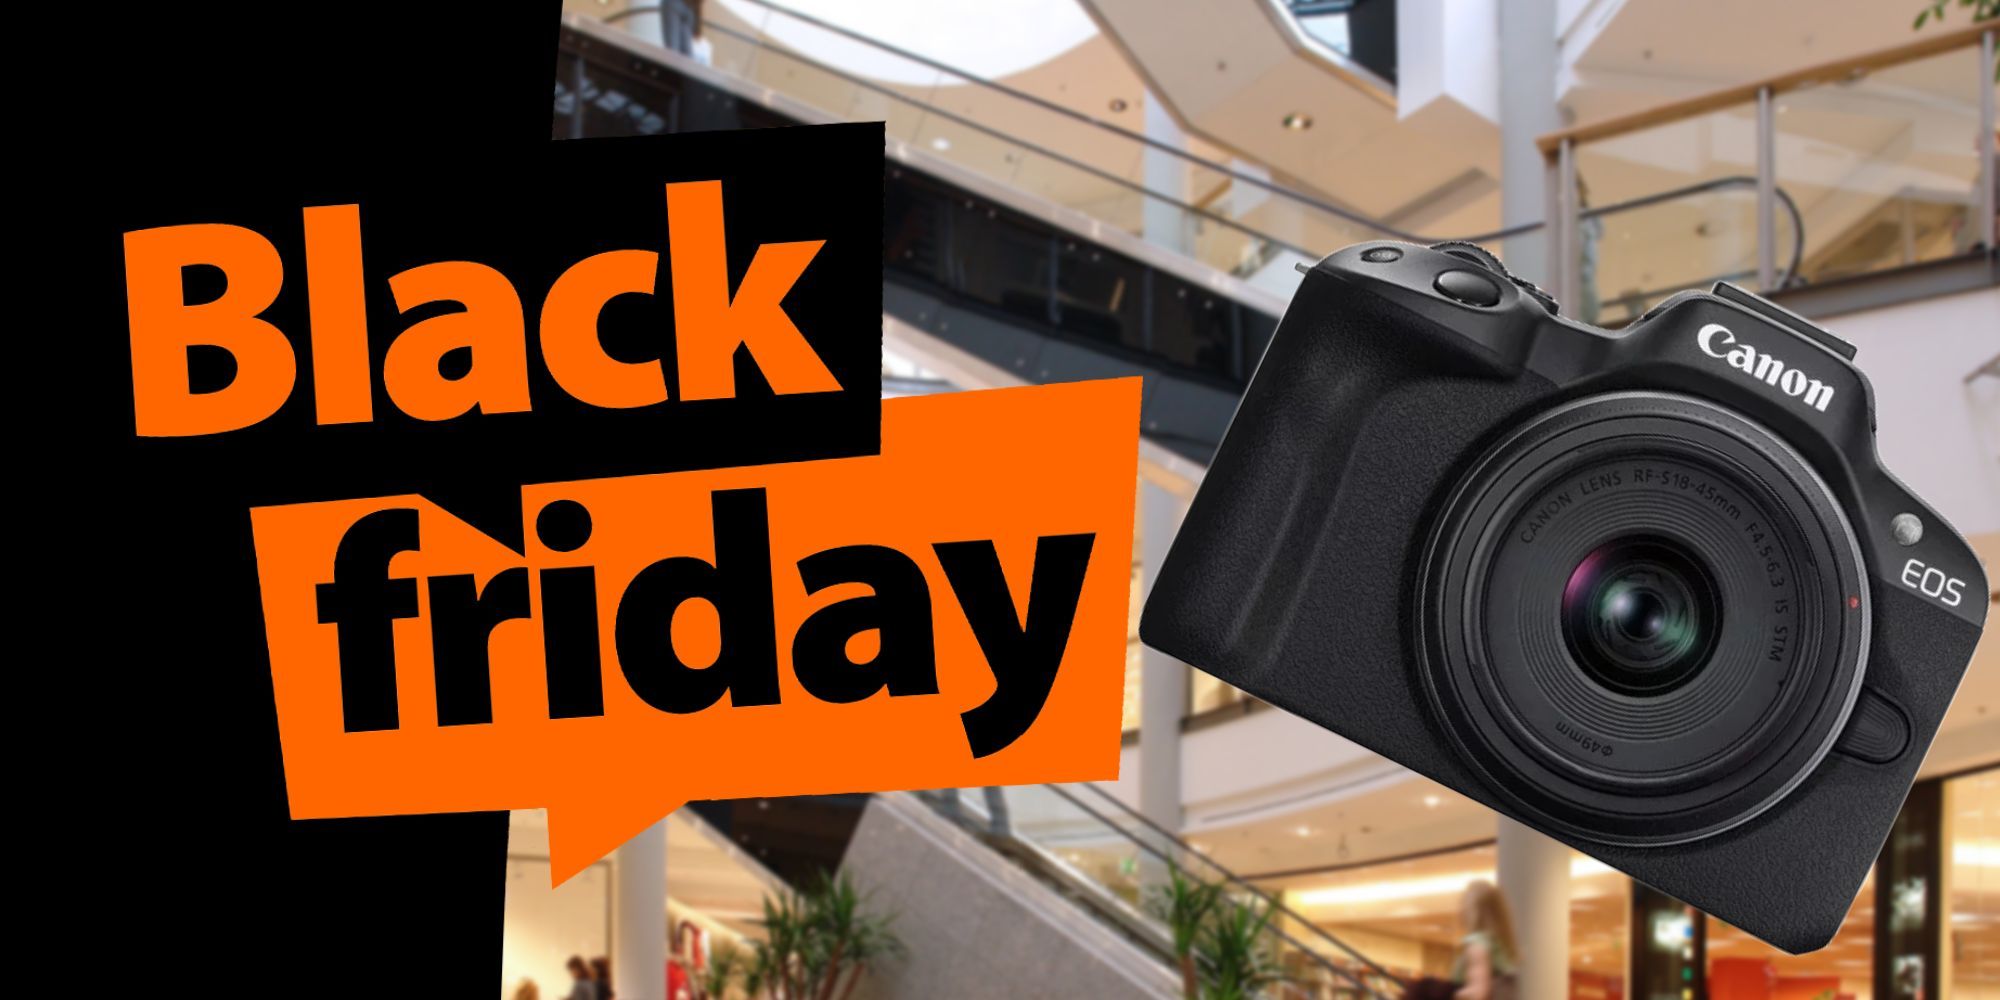 black friday streaming deals featured image